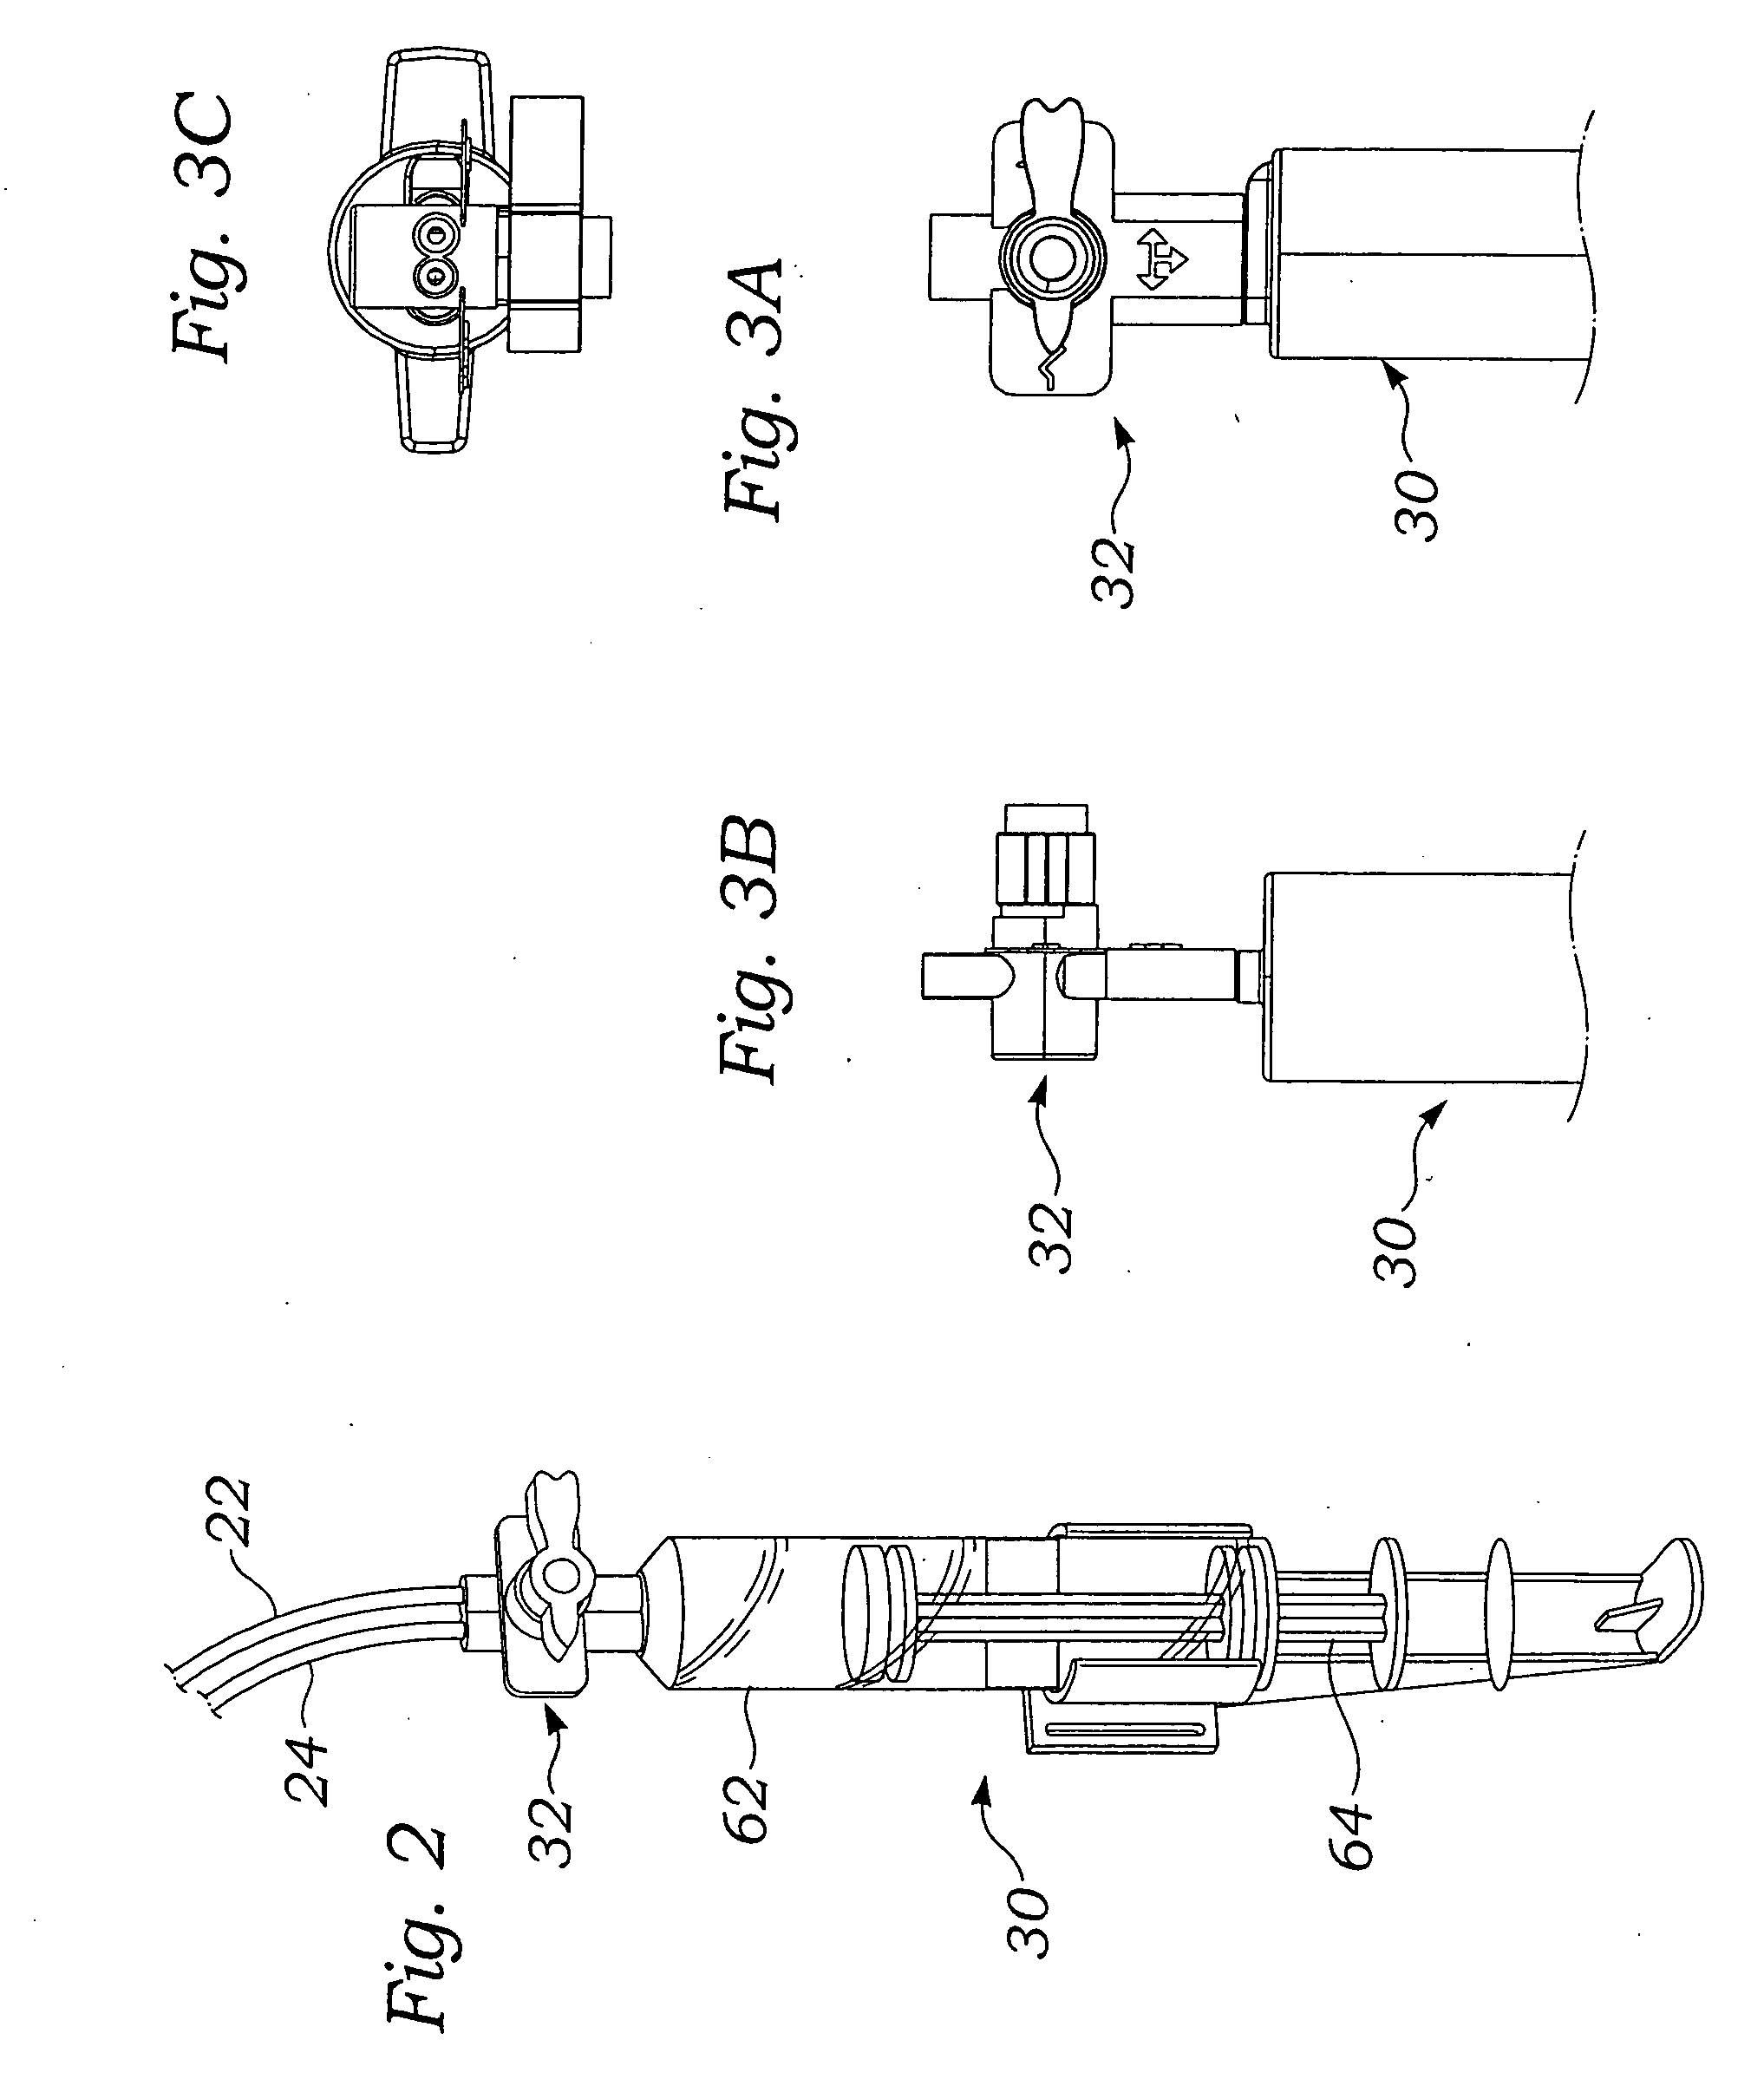 Closed blood sampling system with isolated pressure monitoring